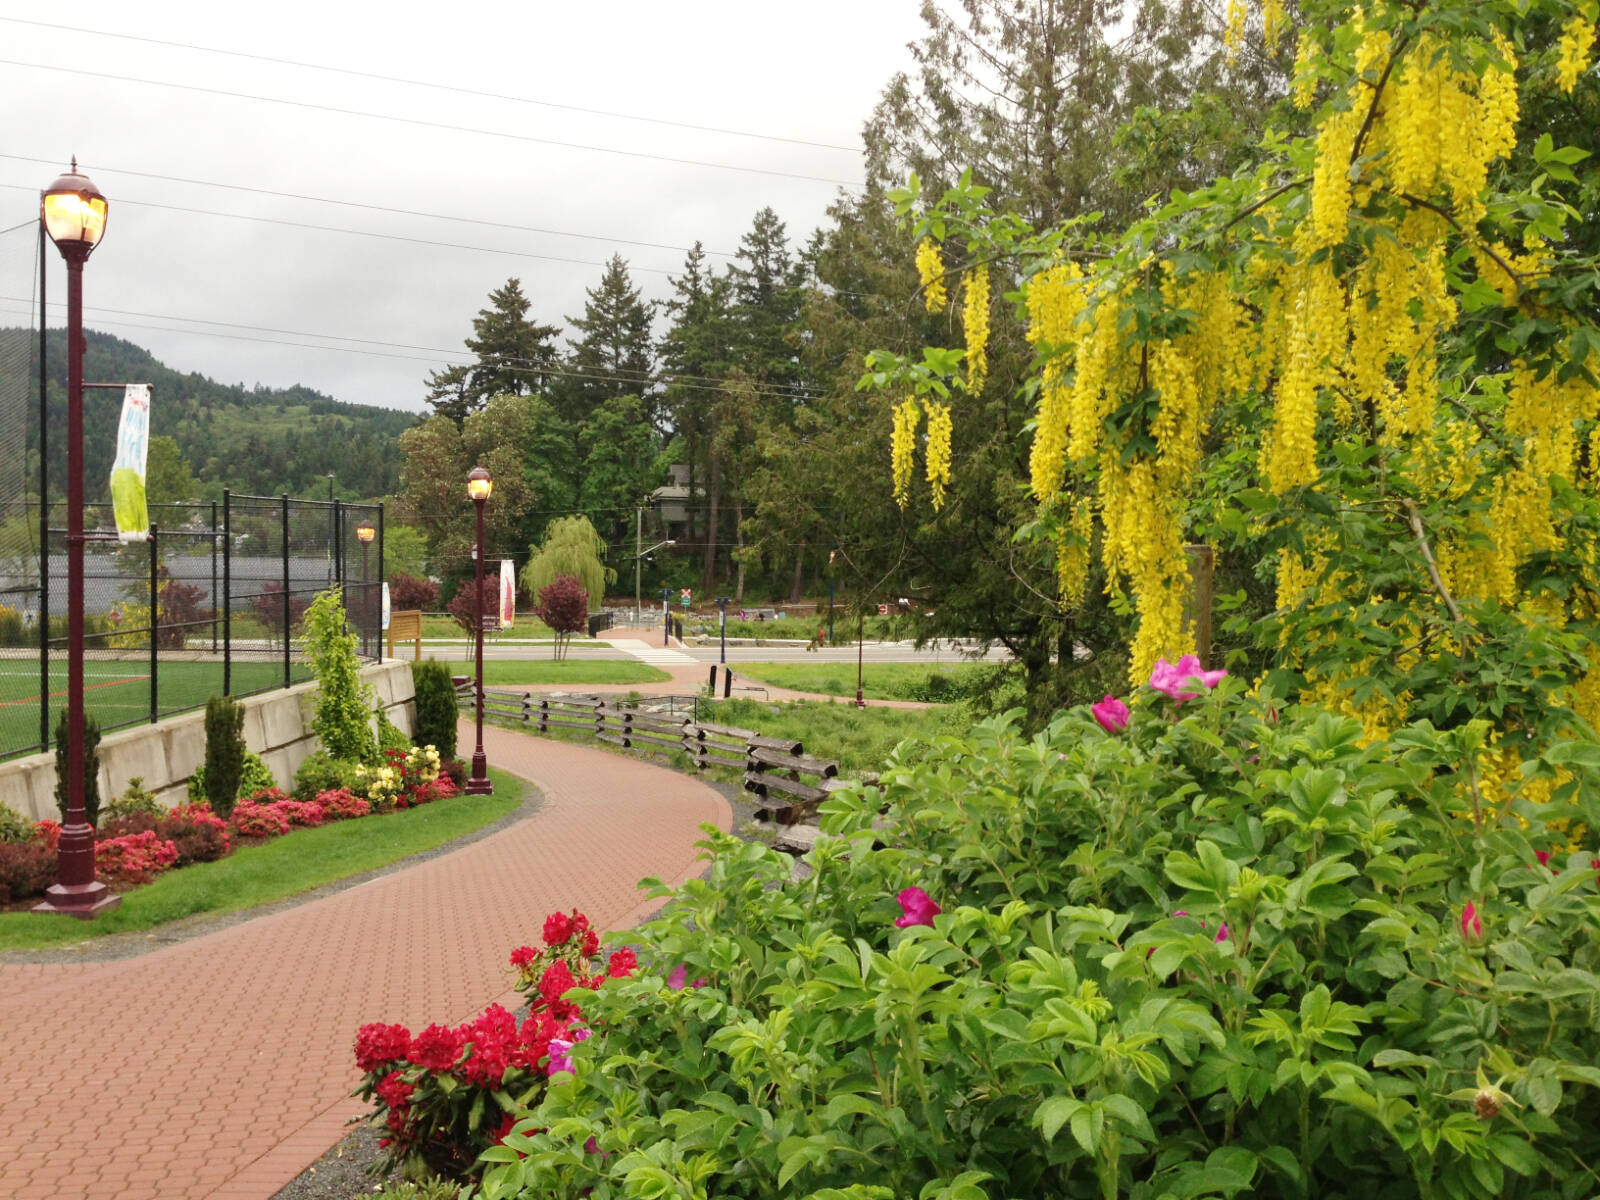 Langford is a fast-growing community with a full suite of amenities to enjoy. Jen Blyth photo / WestCoastTraveller.com